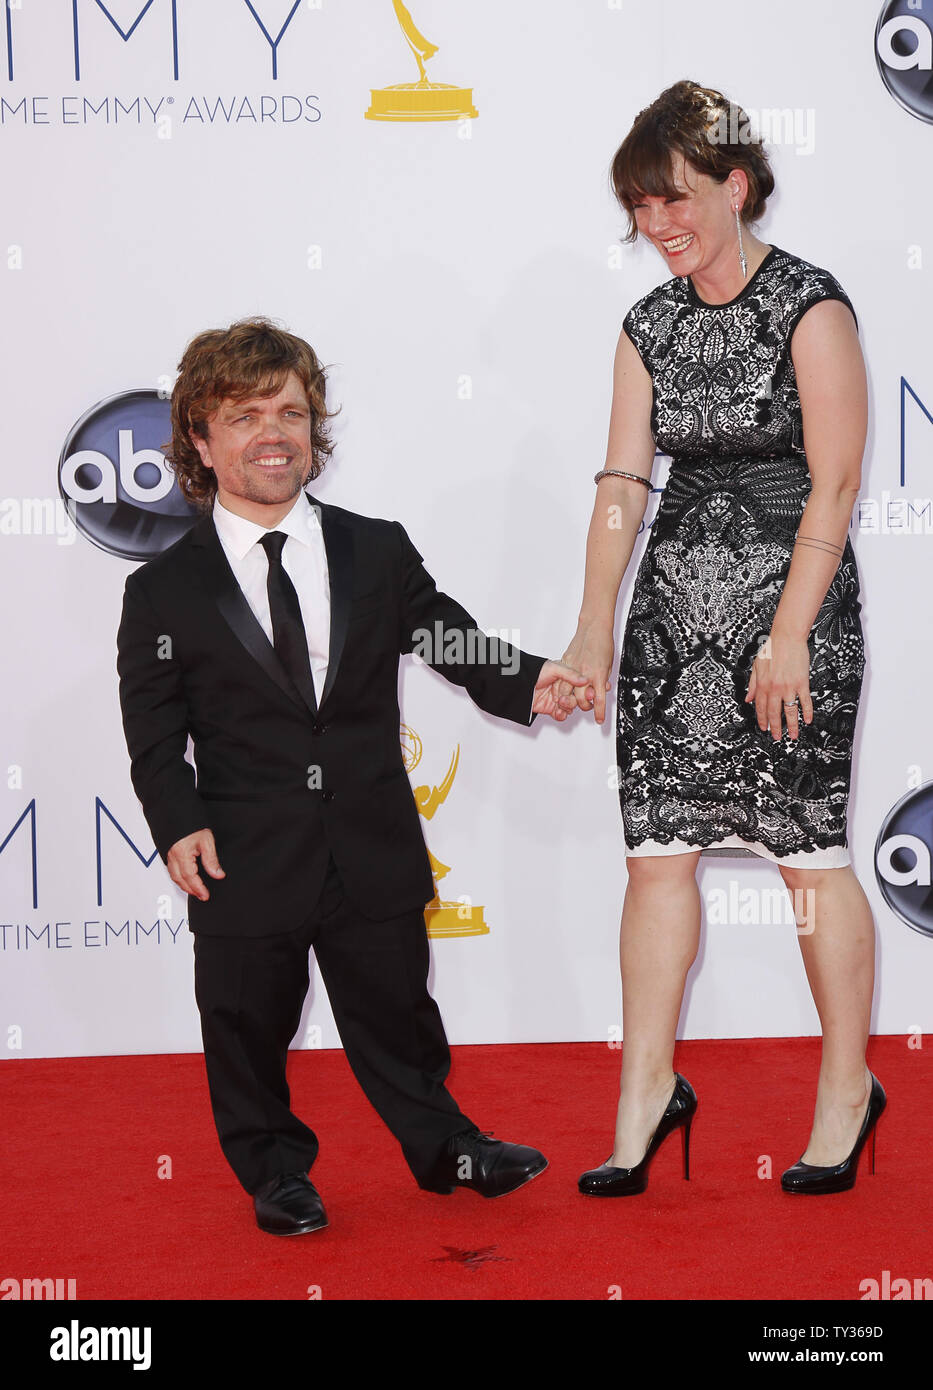 Actor Peter Dinklage and wife Erica Schmidt arrive at the 64th Primetime Emmy Awards at the Nokia Theatre in Los Angeles on September 23, 2012.   UPI/Danny Moloshok Stock Photo